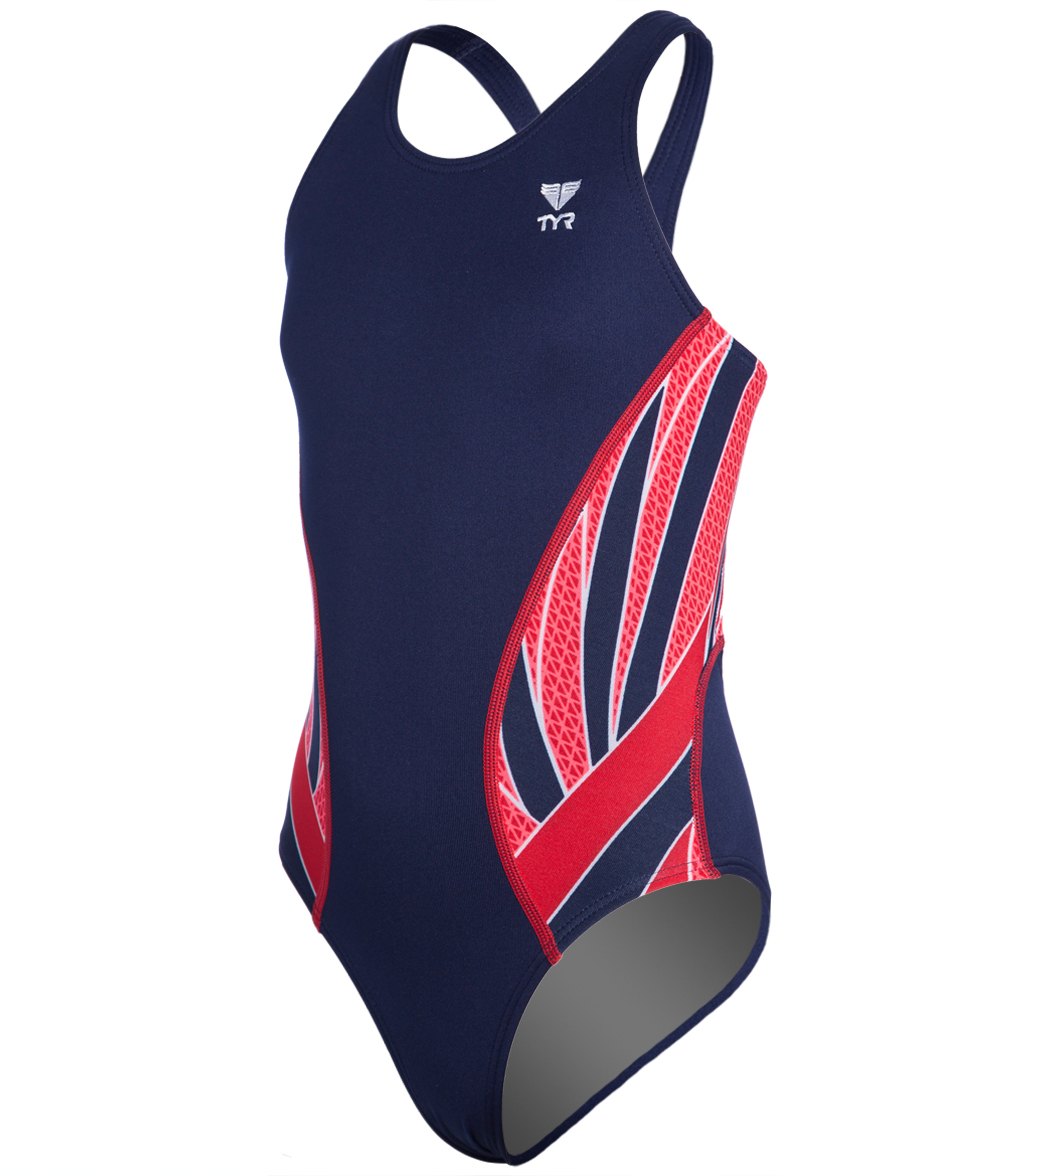 TYR Girls' Phoenix Maxfit One Piece Swimsuit - Navy/Red 22 Polyester/Spandex - Swimoutlet.com